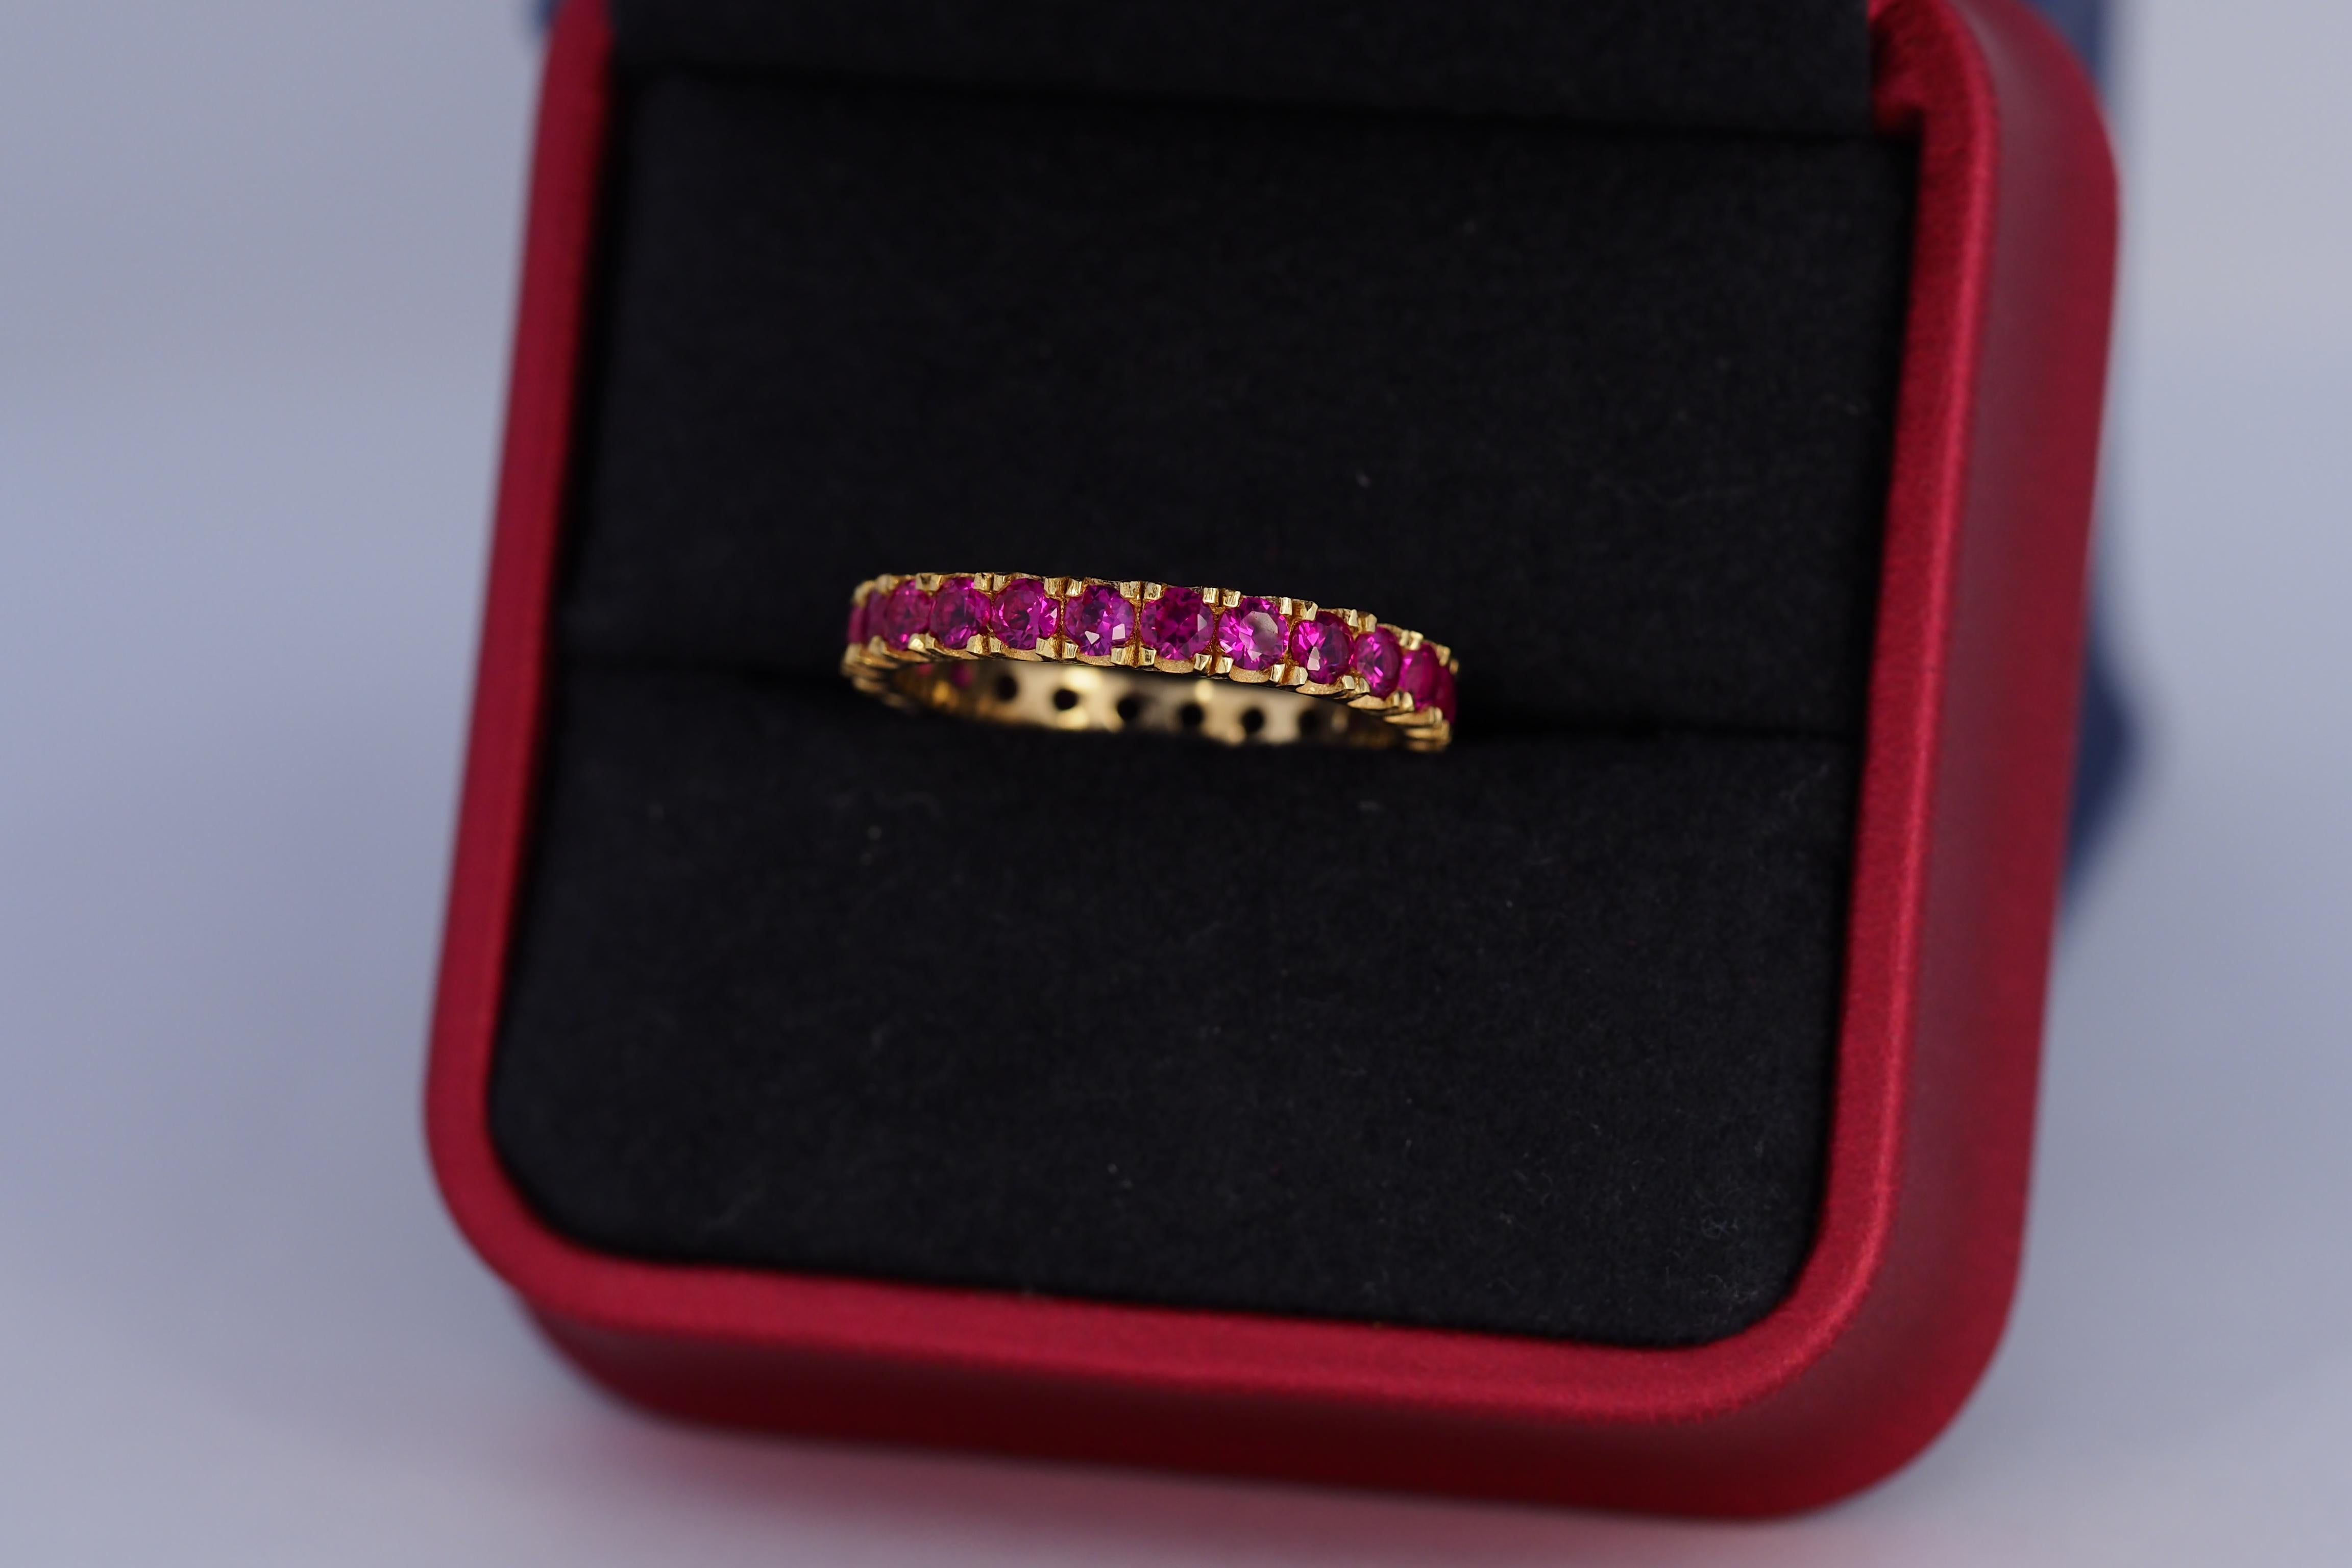 For Sale:  Pinkish red gemstone 14k gold eternity ring band. 2